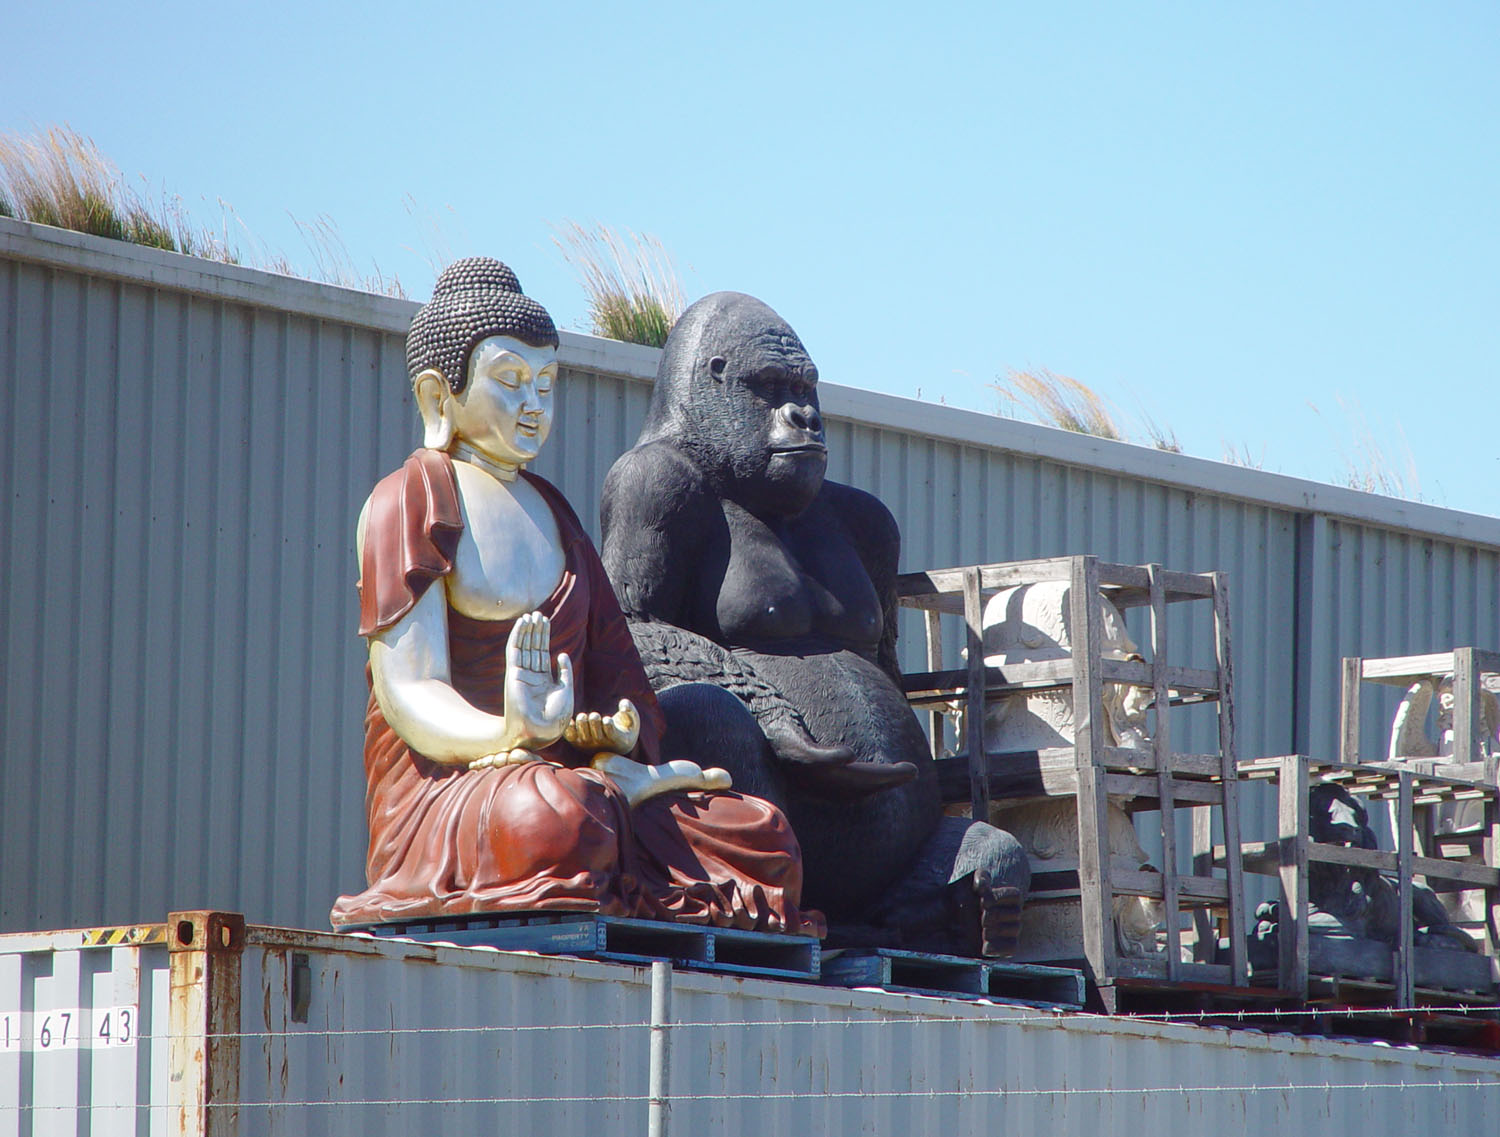 Buddha and Gorilla cast their blessings over the Trentham Railway Station . . . or is the Gorilla hoping for a banana?